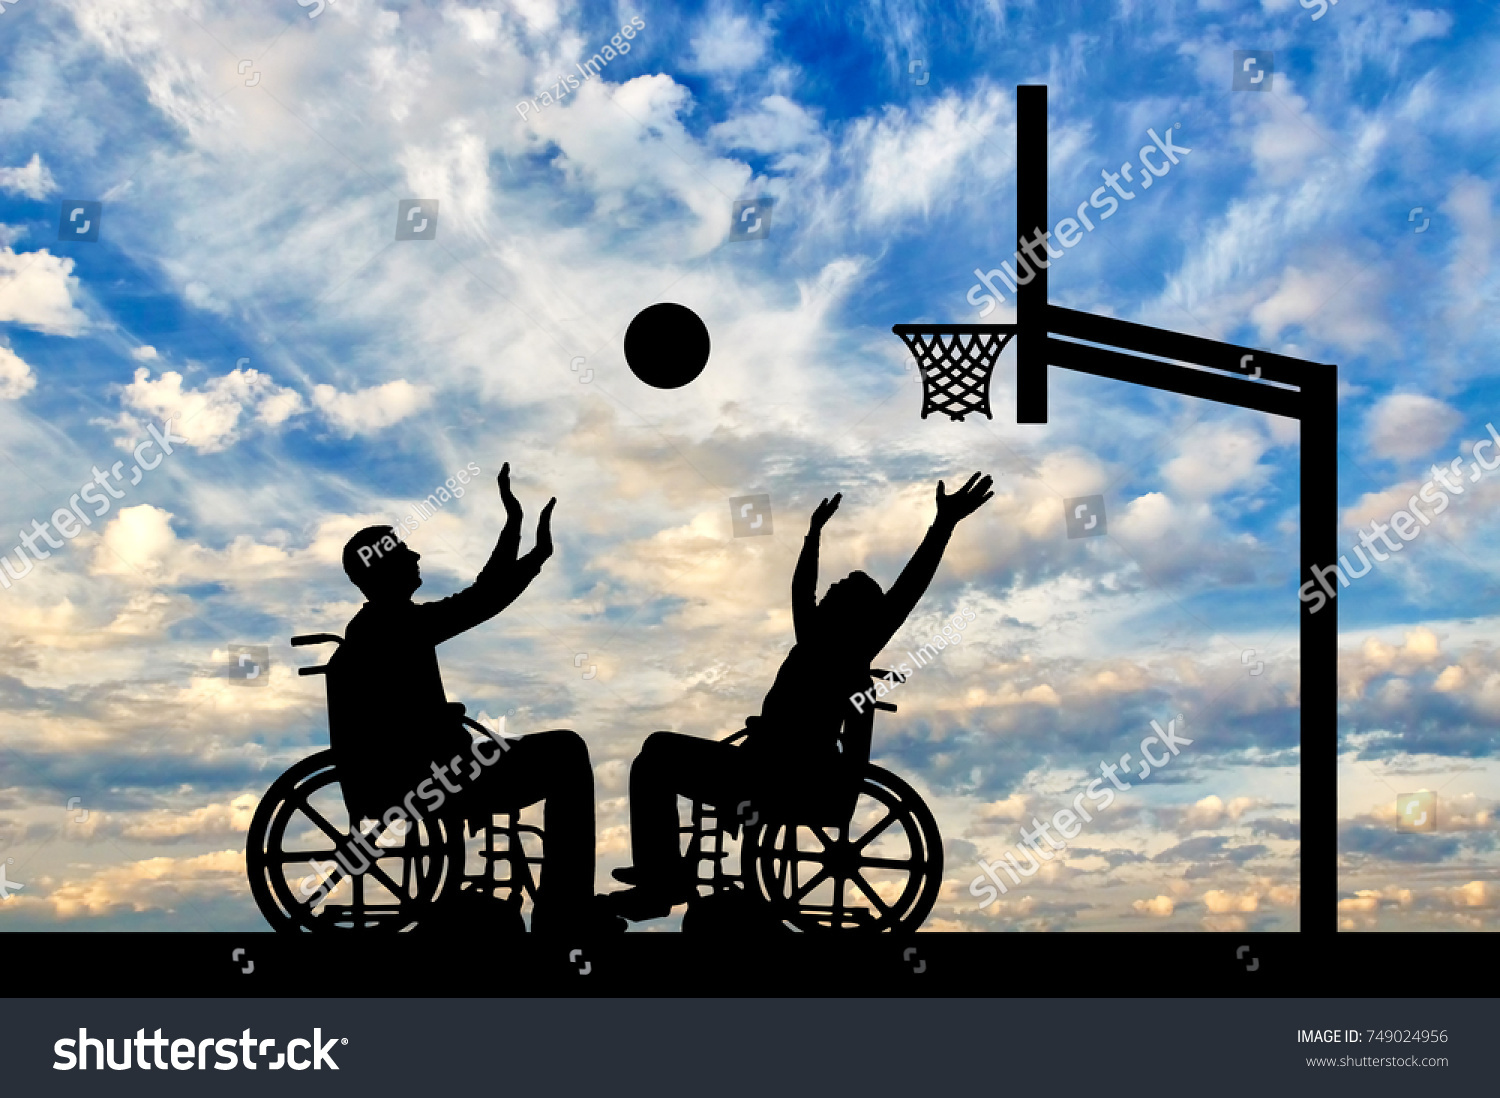 Two Disabled People Play Wheelchair Basketball のイラスト素材